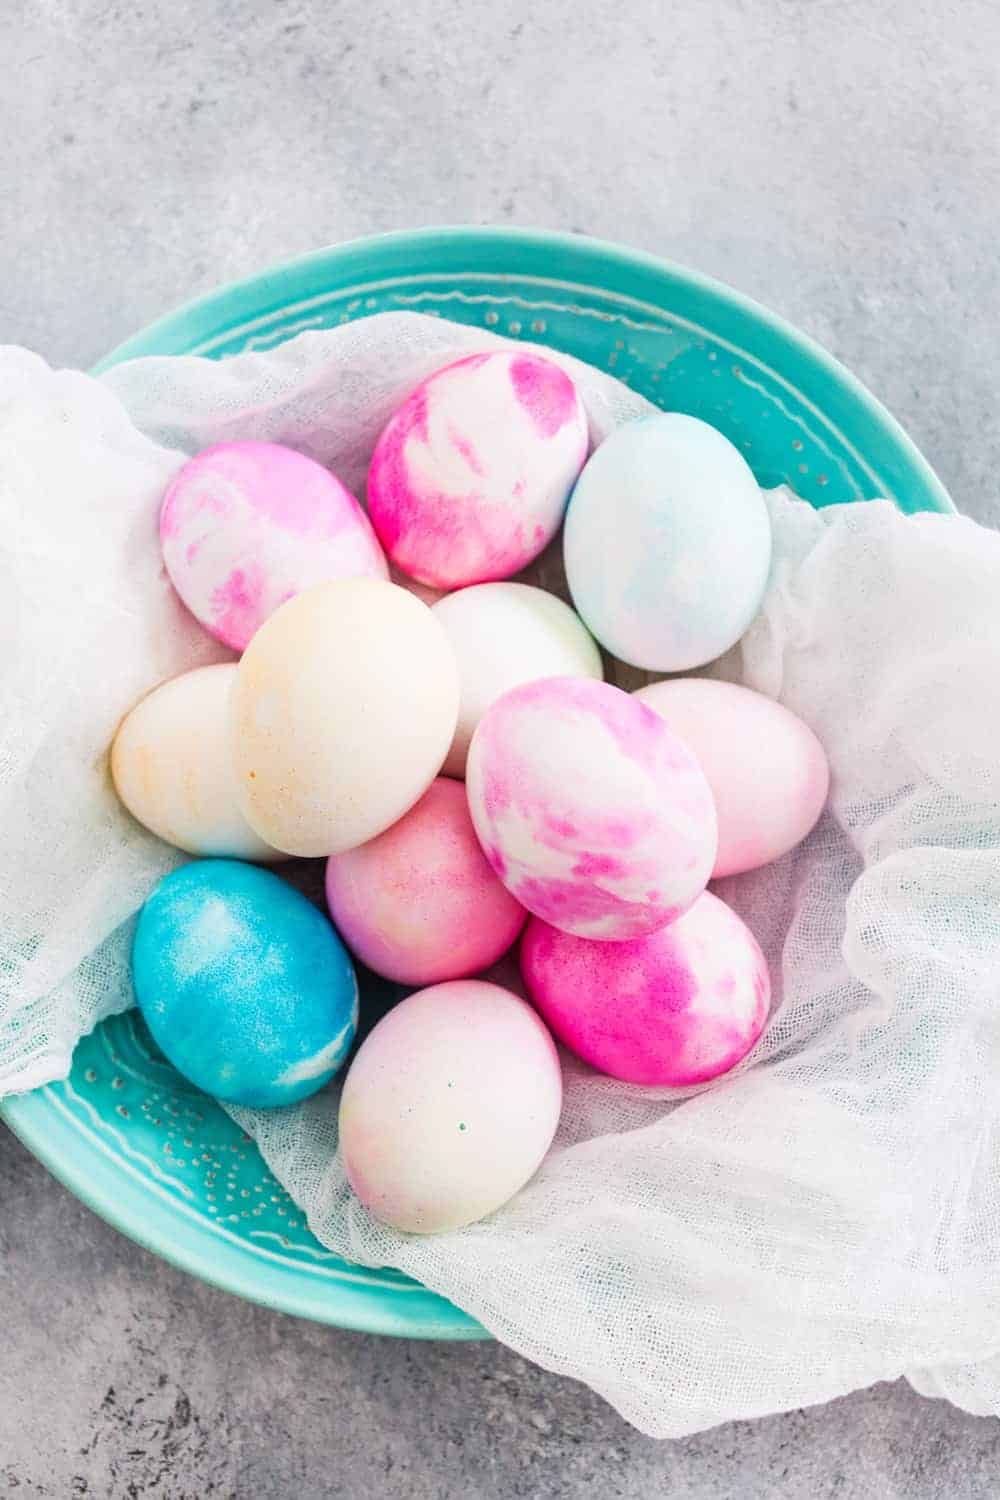 Whipped Cream Dyed Eggs are super simple and so much fun.  The perfect family craft!